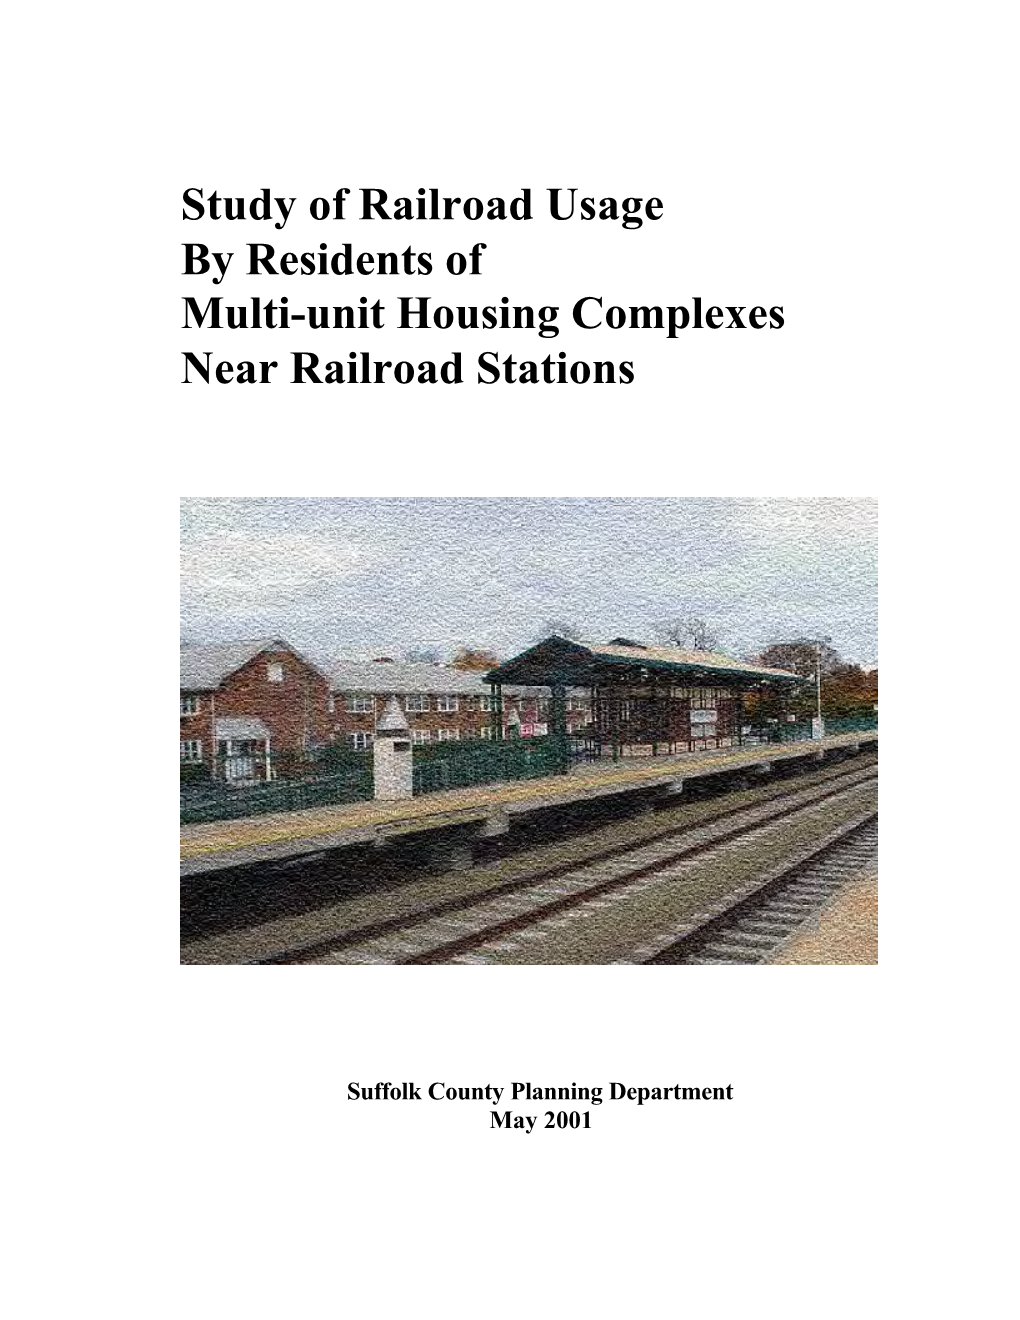 Study of Railroad Usage by Residents of Multi-Unit Housing Complexes Near Railroad Stations